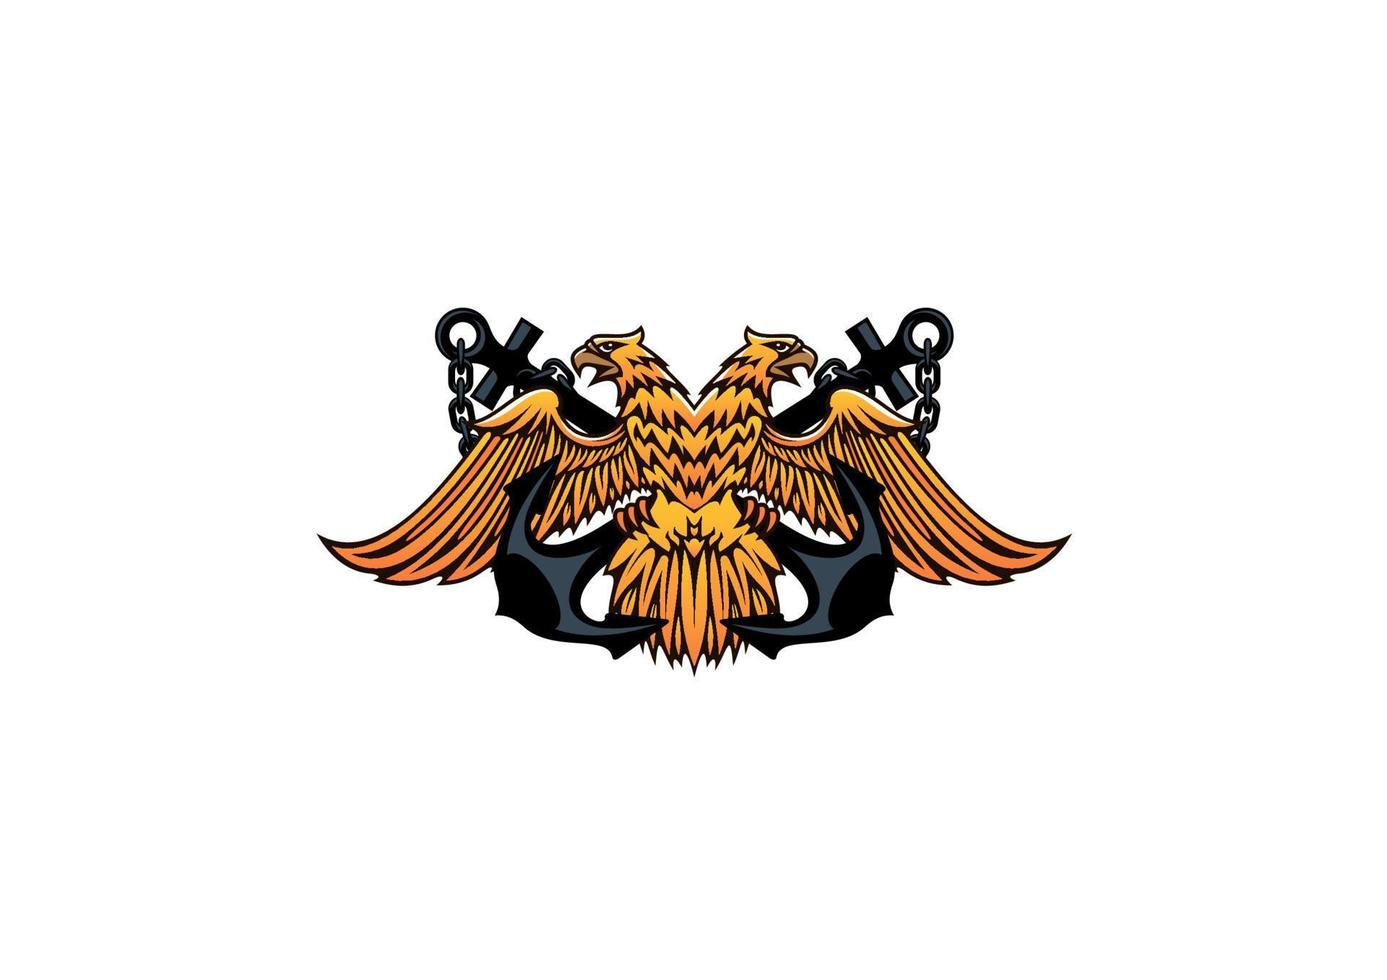 Maritime emblem with double headed eagle vector